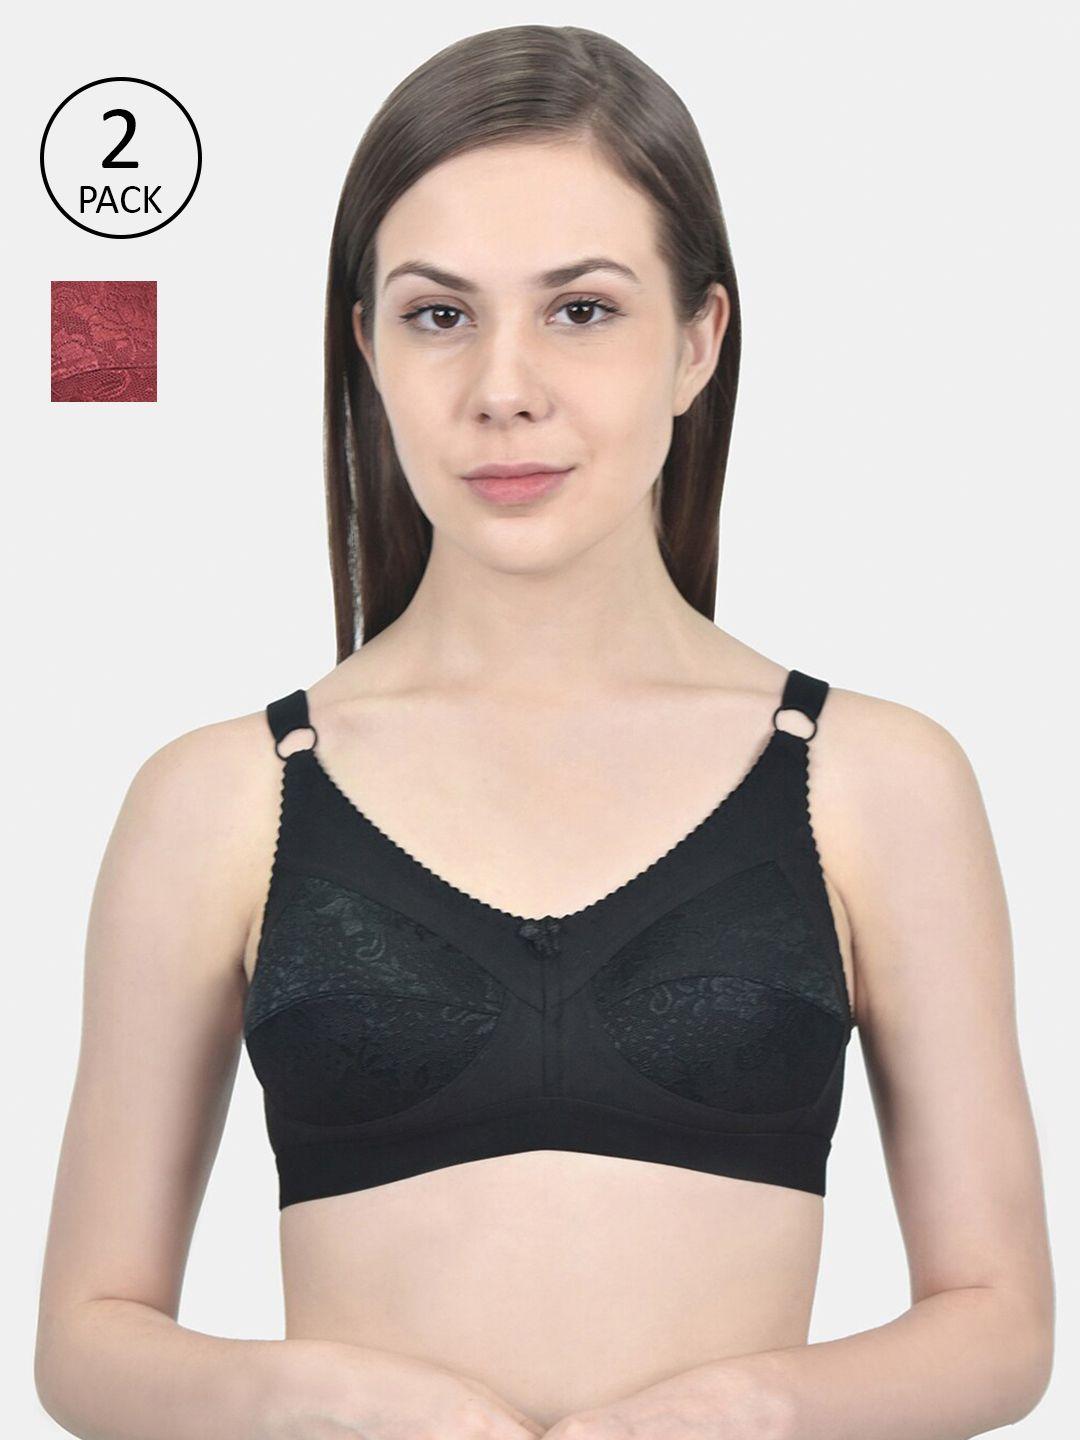 innocence pack of 2 cotton non-padded wirefree bra